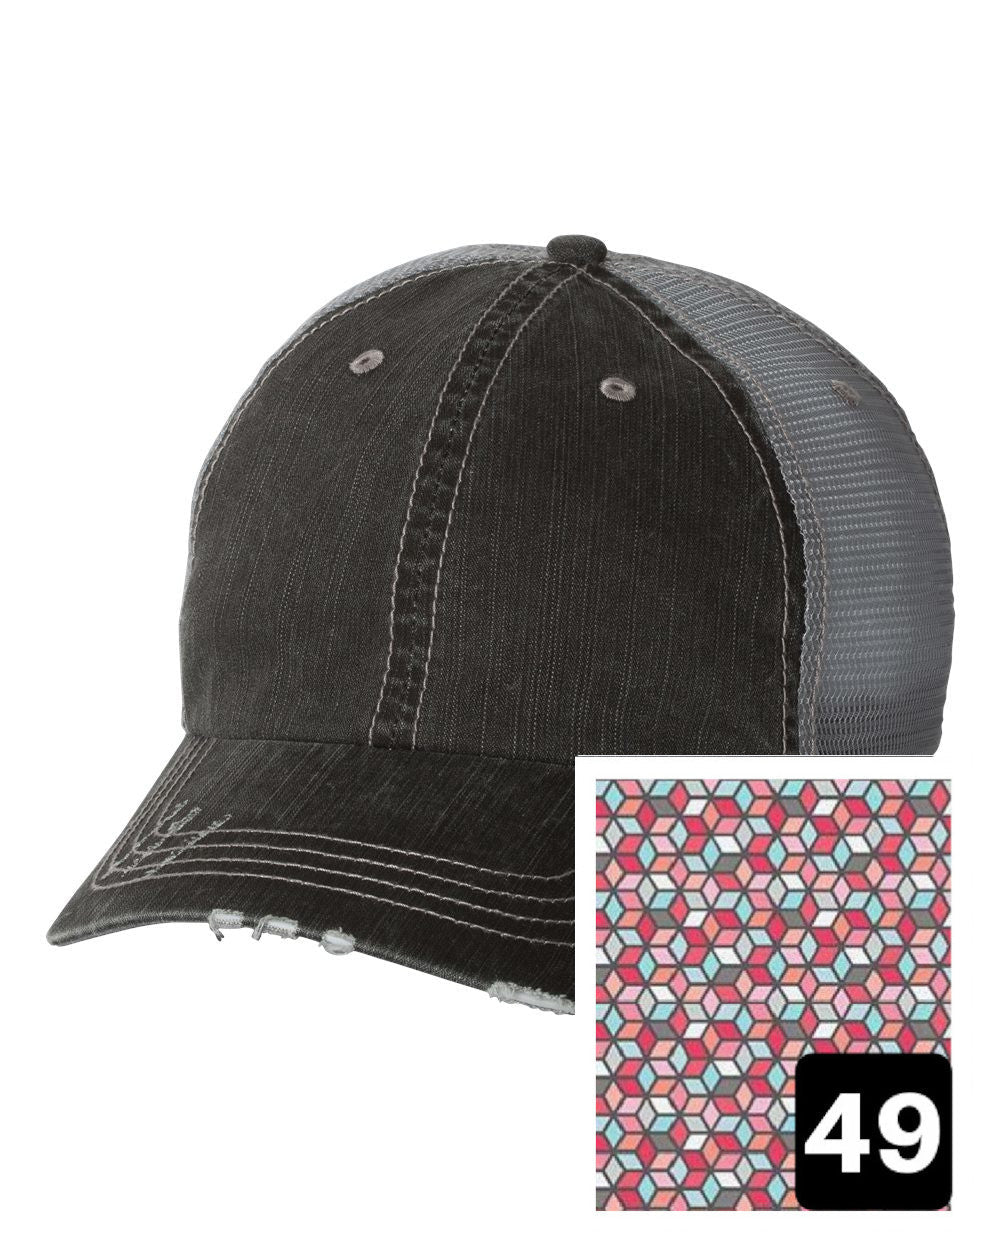 gray distressed trucker hat with black with white hatch fabric state of Mississippi